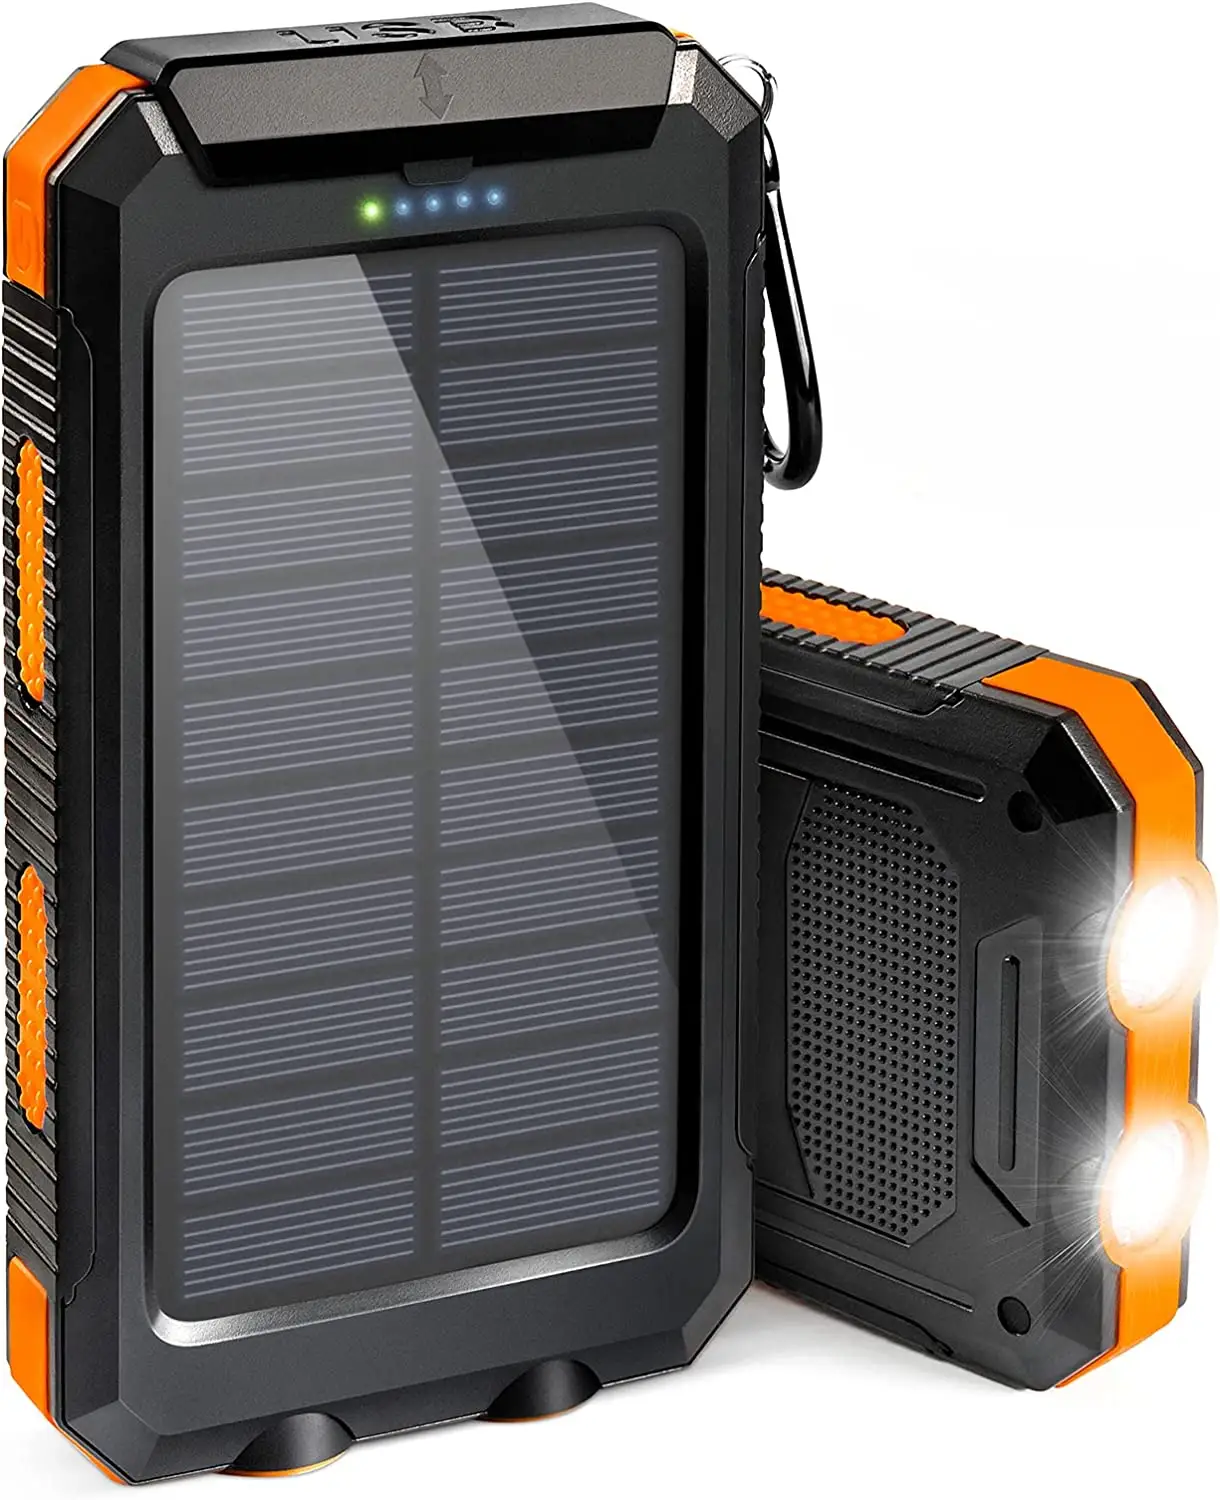 Solar Phone Charger 20000mAh, Suscell Portable Solar Power Bank for Cell Phone Camping External Backup Battery Pack Charger